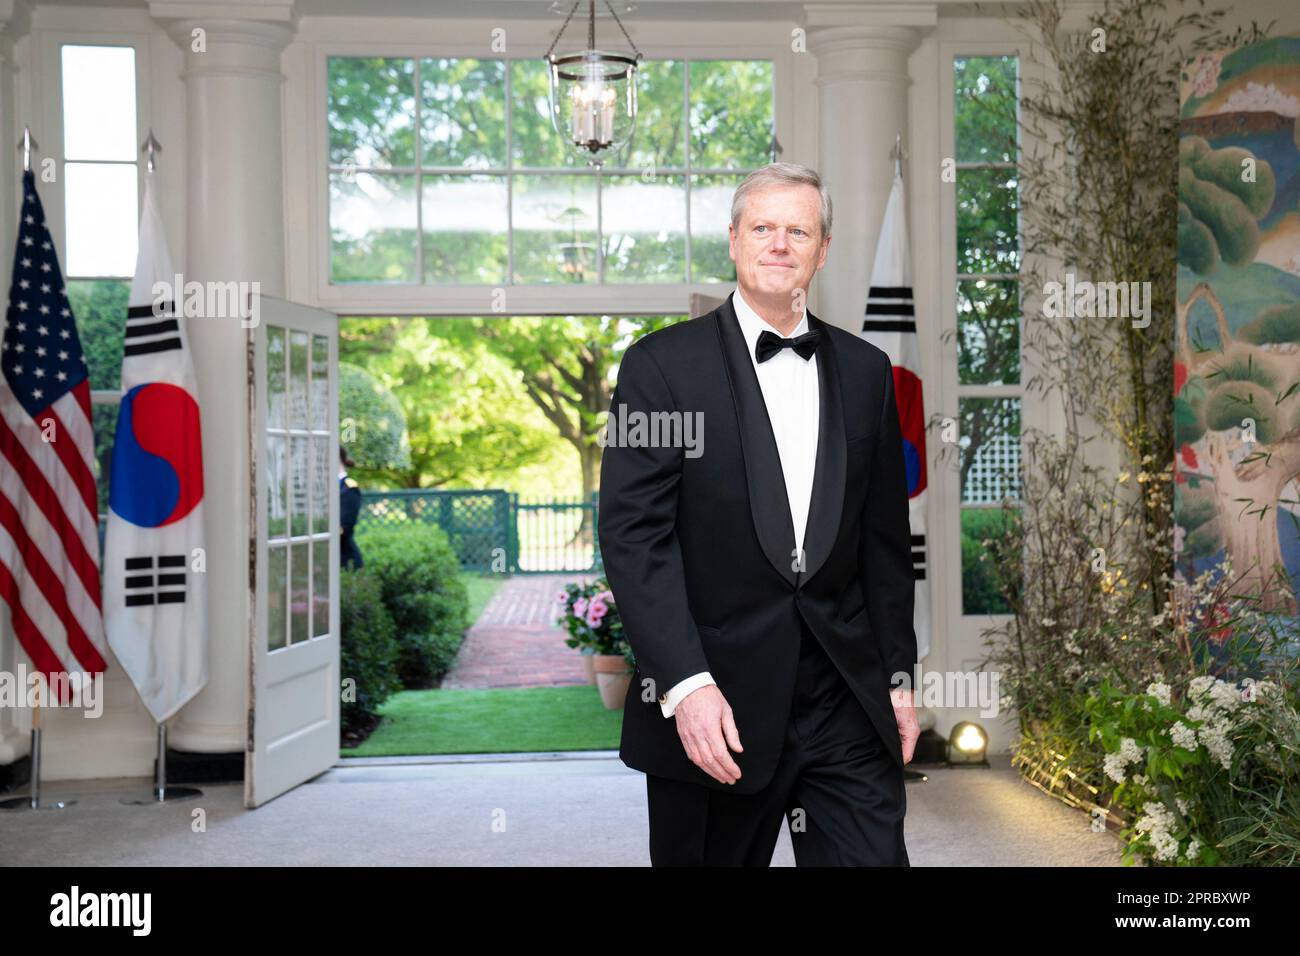 Charlie Baker, Former Governor of Massachusetts, arrives to attend a state dinner in honor of South Korean President Yoon Suk Yeol and South Korean First Lady Kim Keon Hee hosted by US President Joe Biden and First Lady Jill Biden at the White House in Washington, DC, US, on Wednesday, April 26, 2023. The US will strengthen the deterrence it provides South Korea against nuclear threats, securing a pledge from Seoul to honor commitments to not pursue its own atomic arsenal. Photo by Sarah Silbiger/Pool/ABACAPRESS.COM Stock Photo